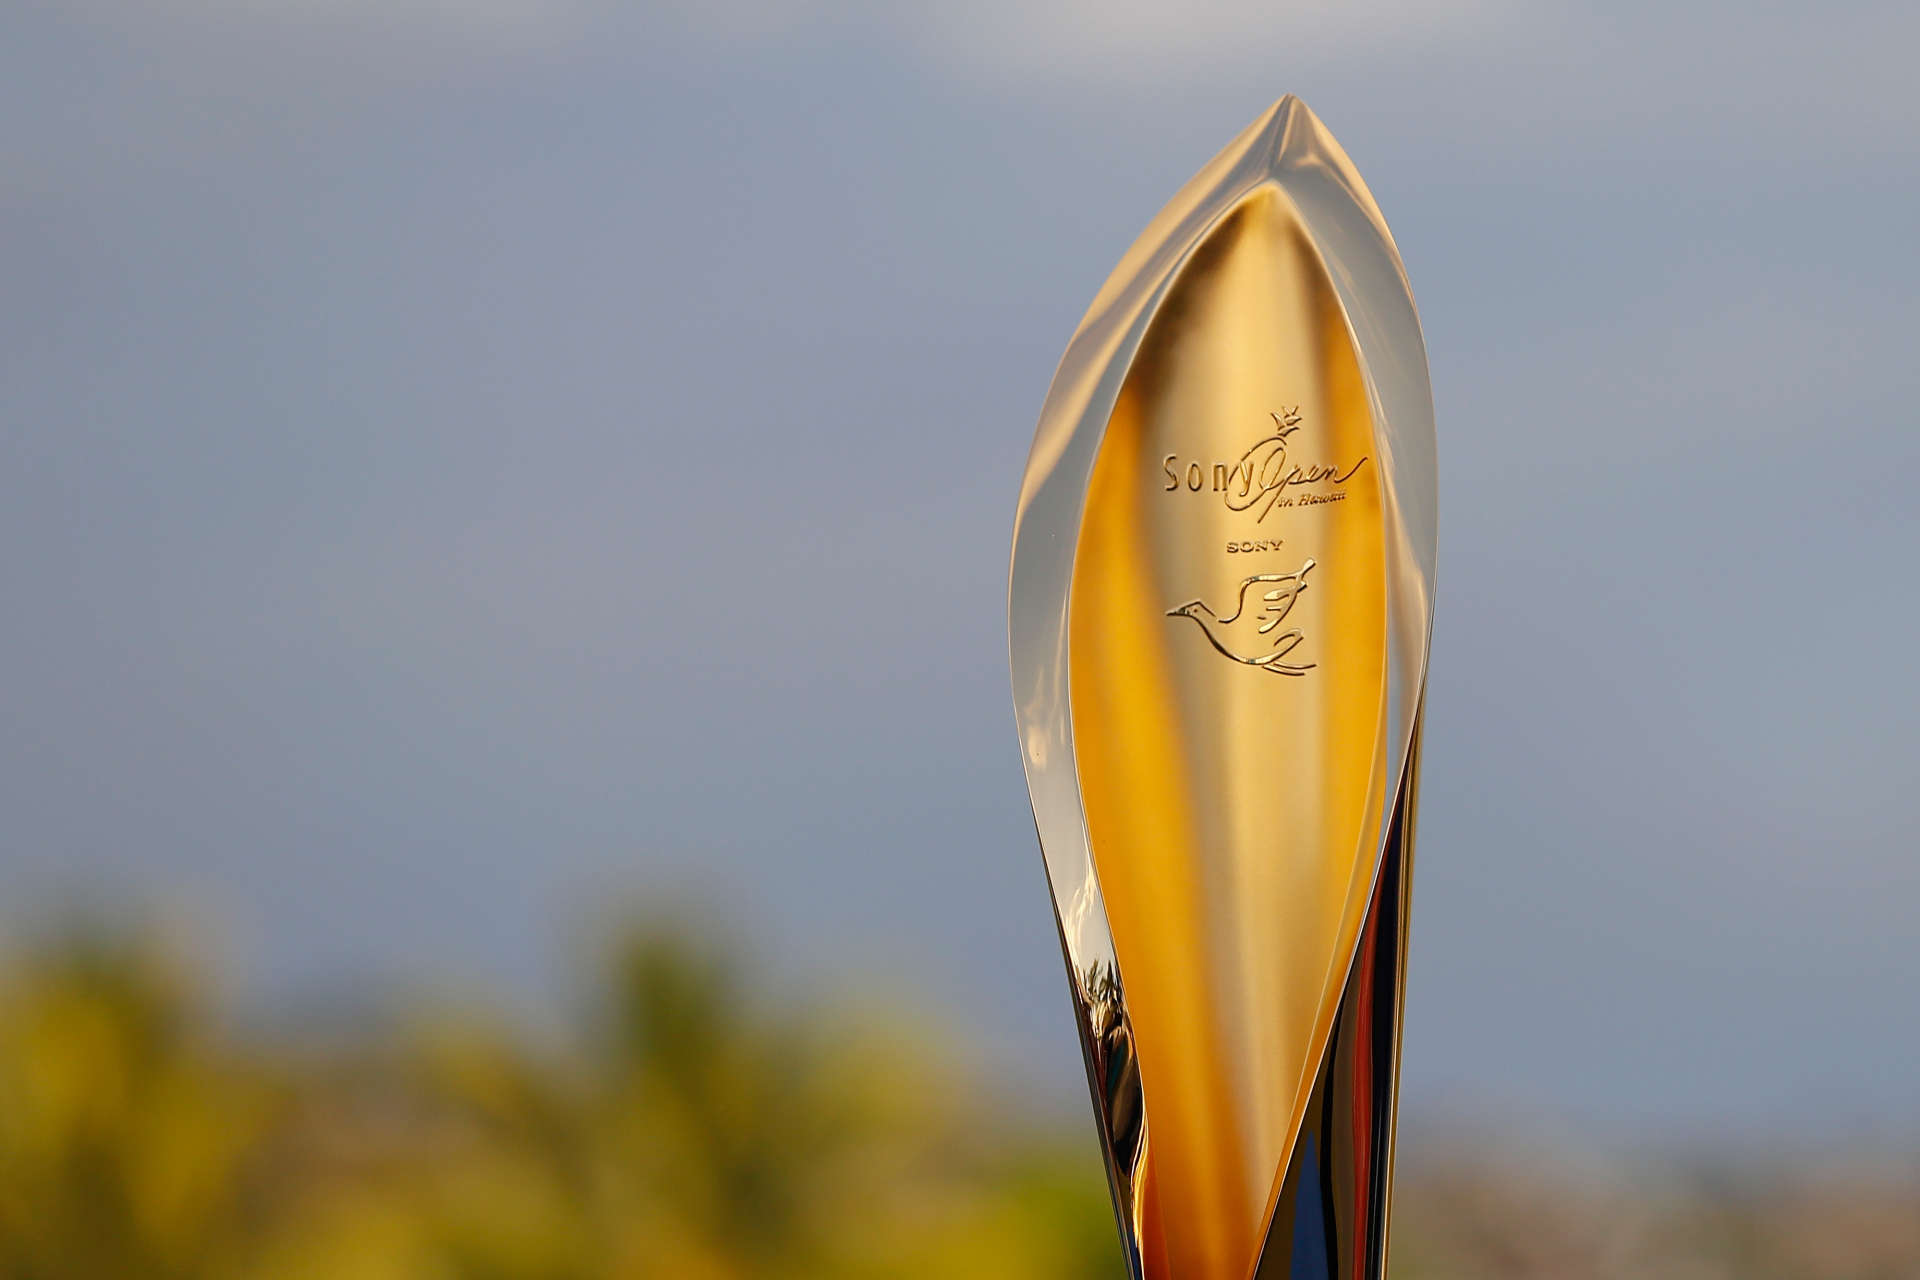 PGA Tour: Cameron Smith wins the Sony Open in Hawaii